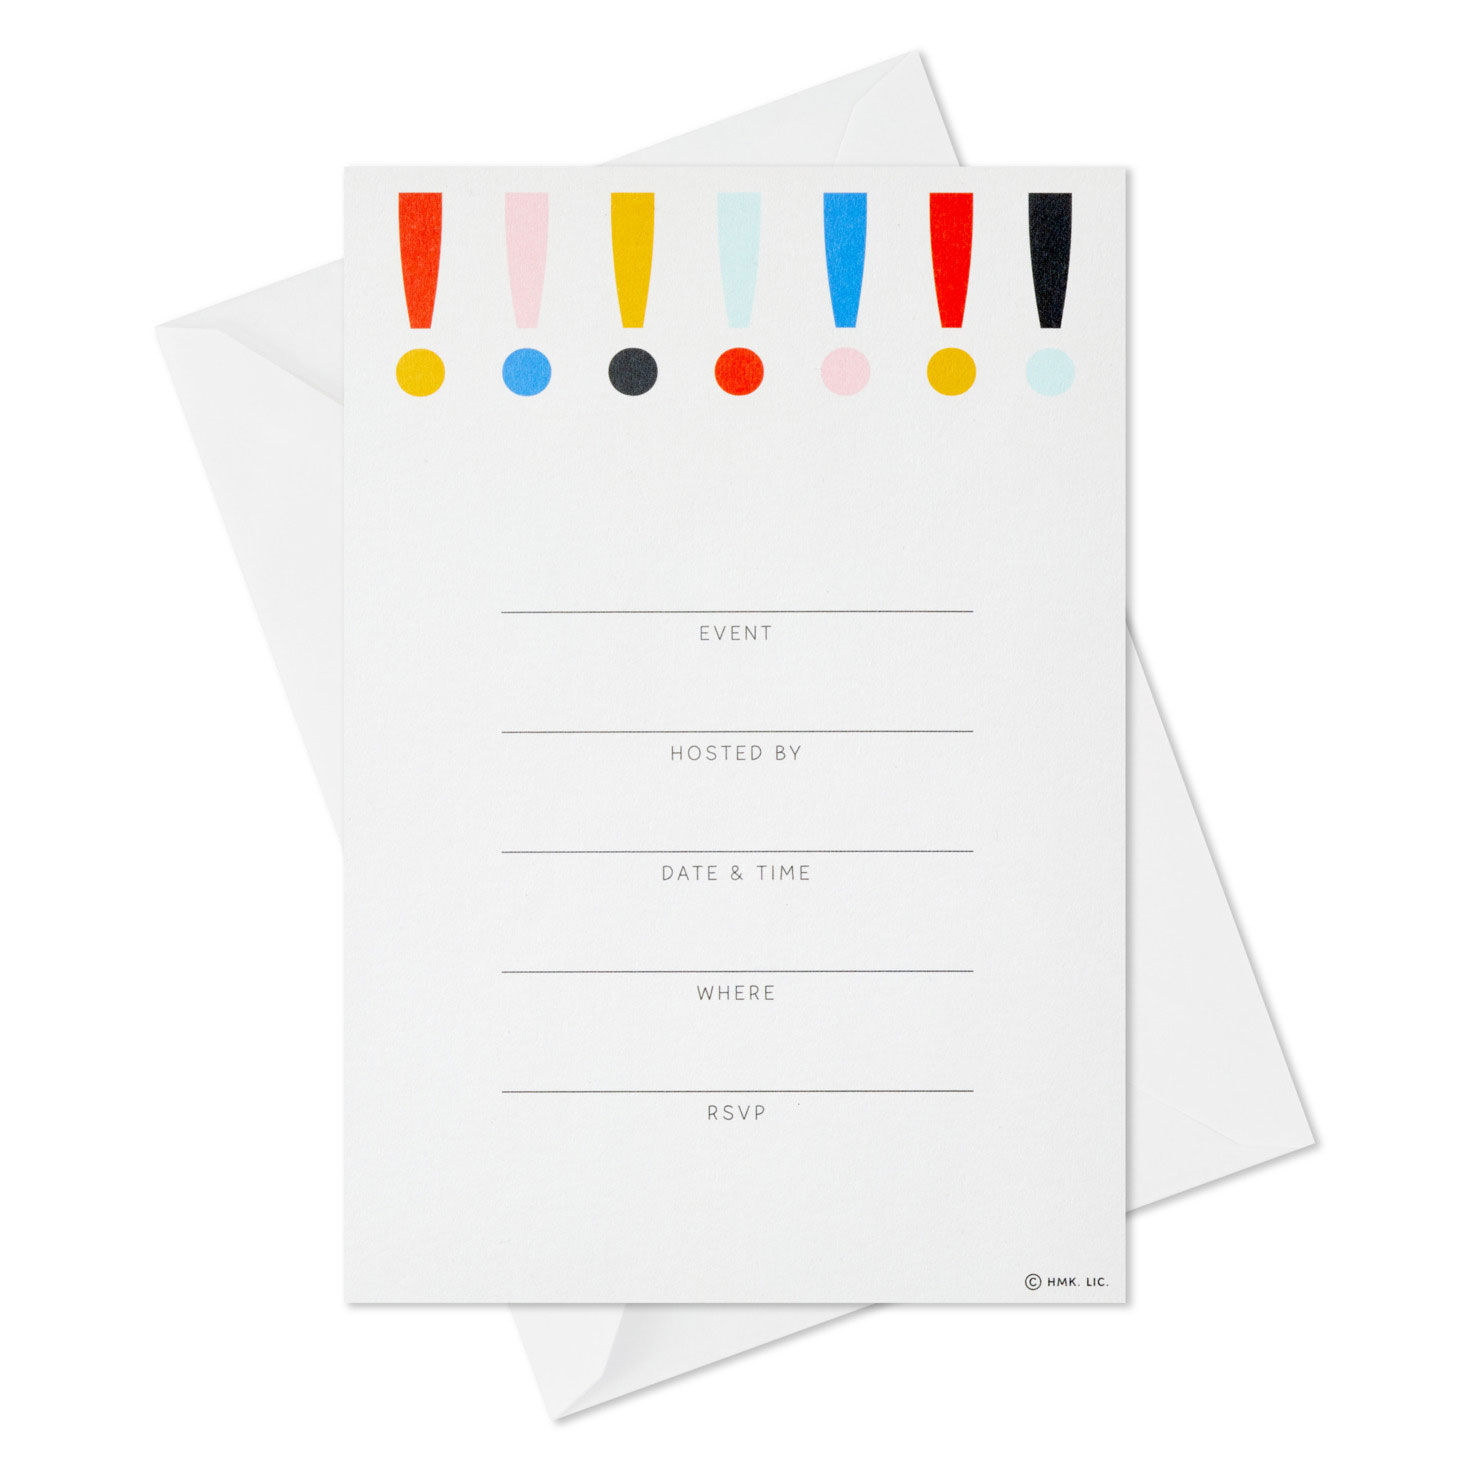 Celebrate! Fill-in-the-Blank Party Invitations, Pack of 10 for only USD 6.99 | Hallmark